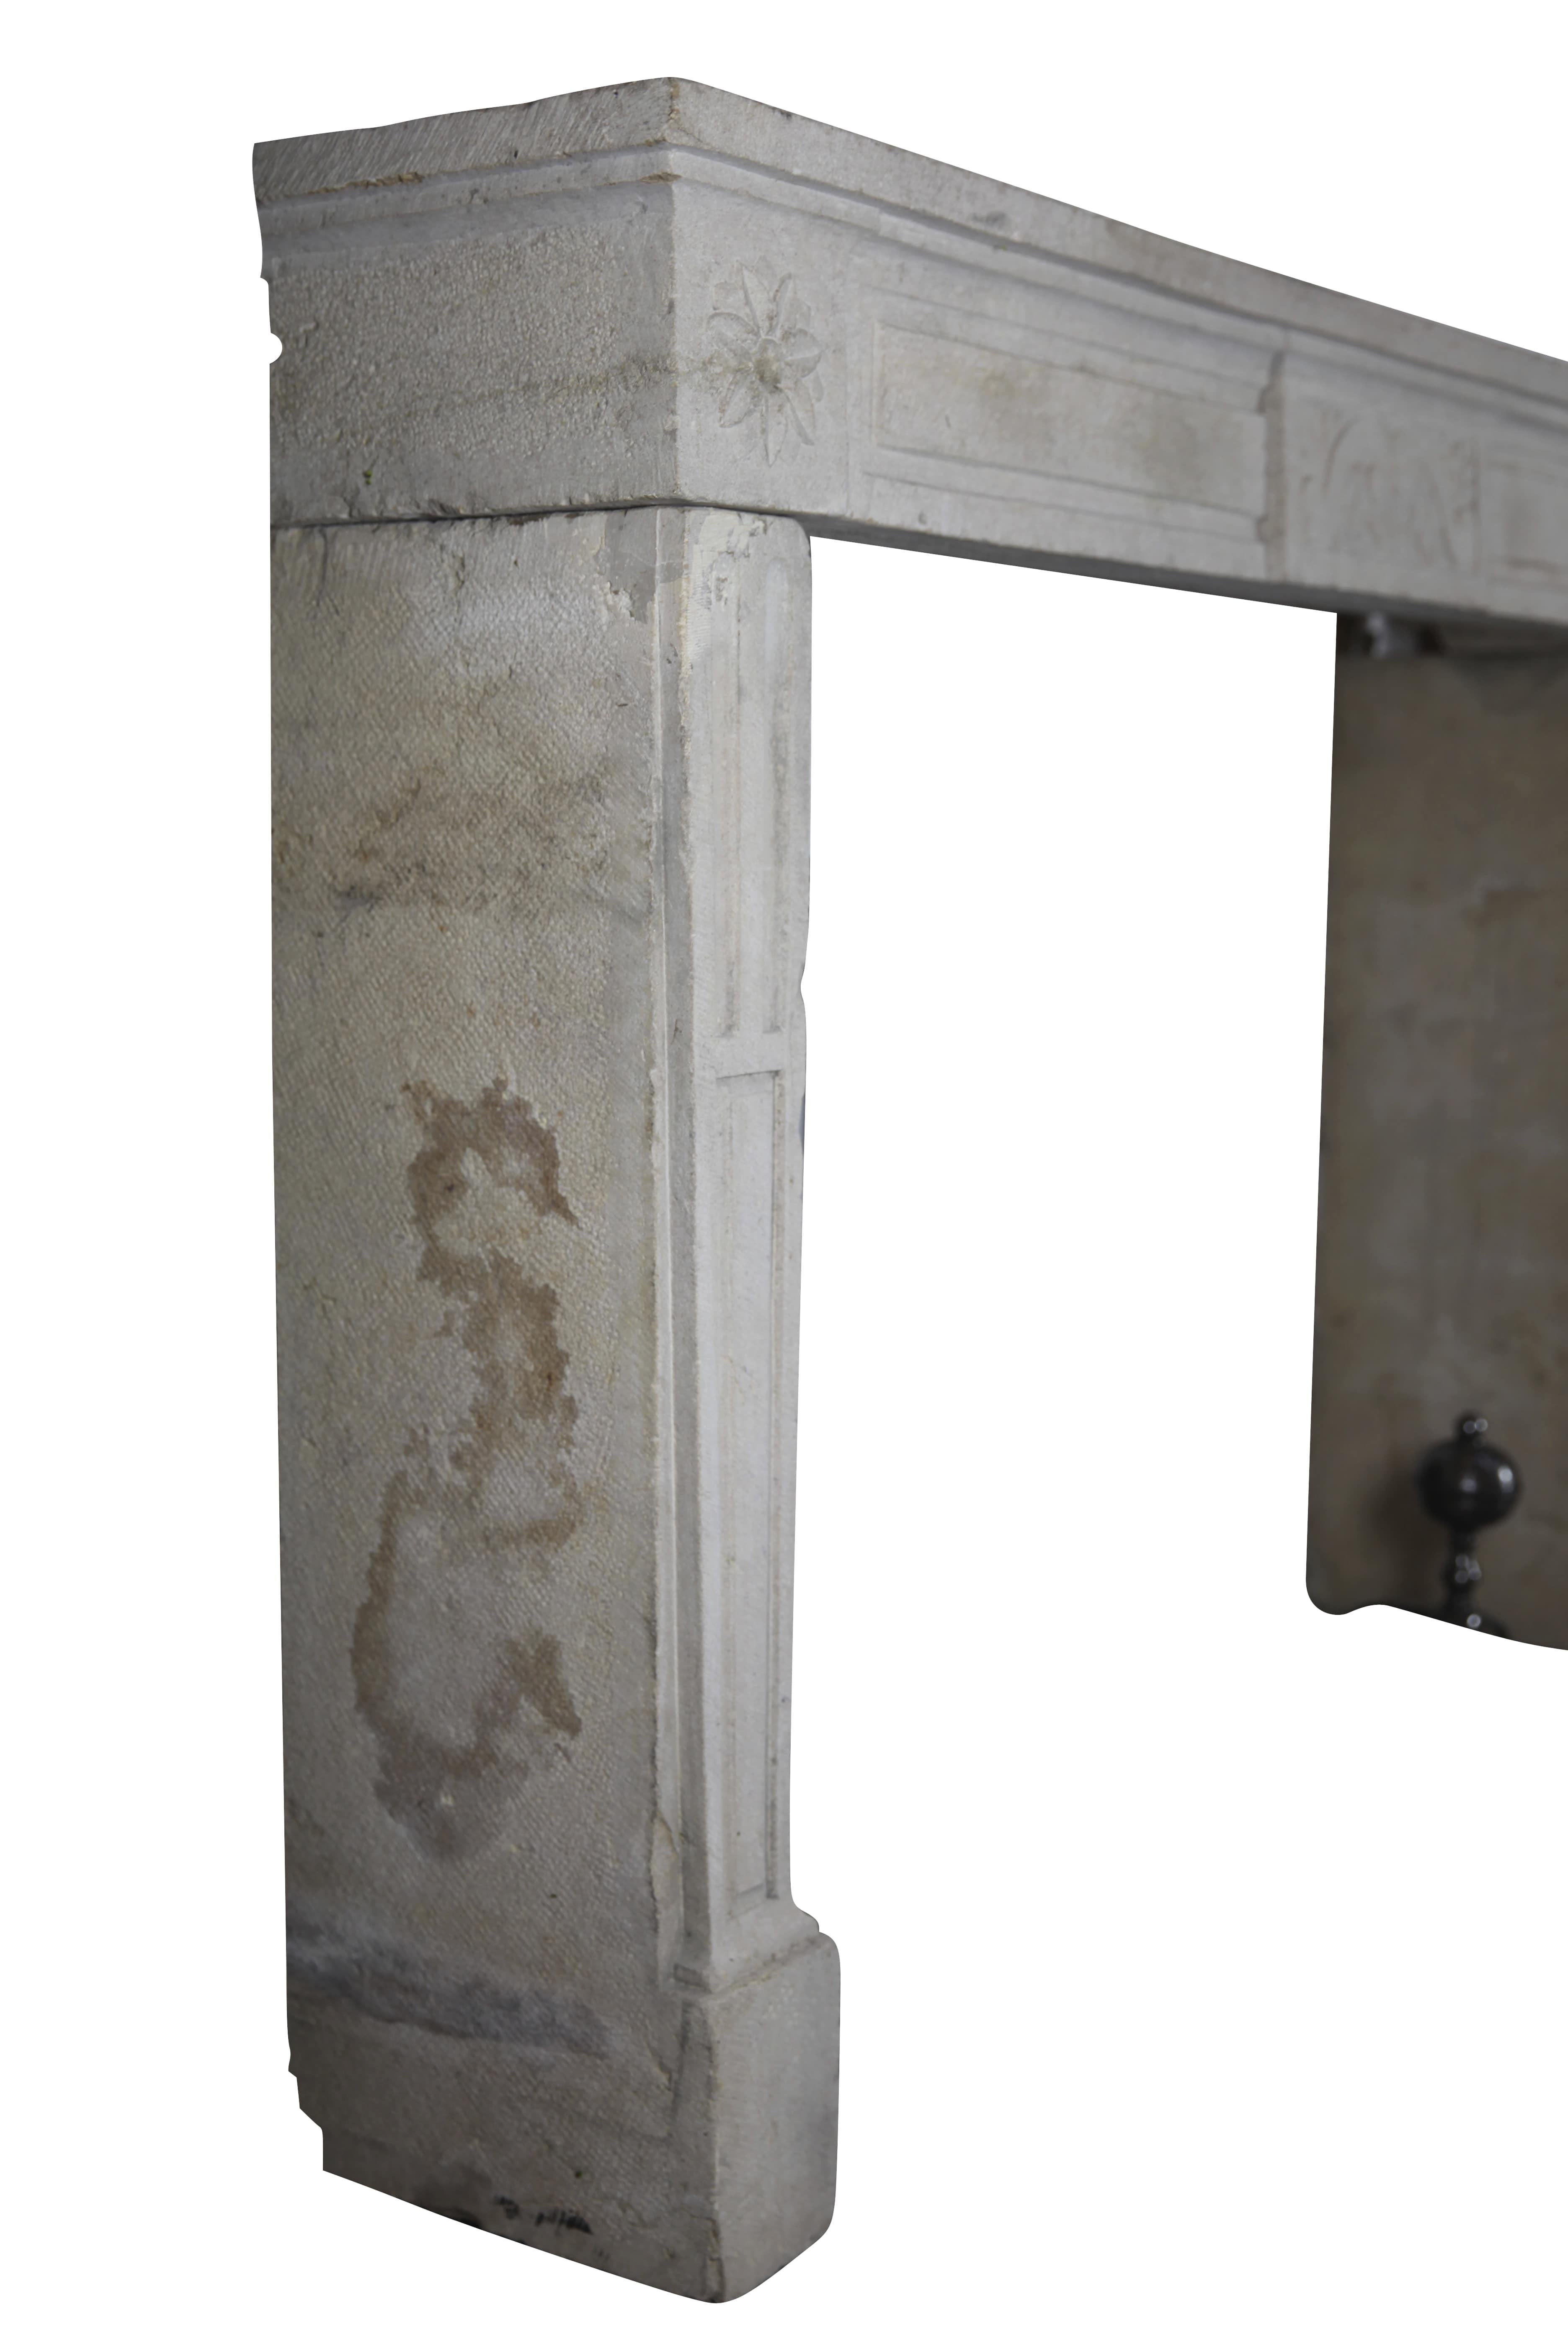 A French country limestone original antique fireplace mantle from the Louis XVI period, 18th century. The jambs are straight. Kind of Classic rustic chimney piece.
Measures:
162 cm exterior width 63.77 inch
108 cm exterior height 42.52 inch
132